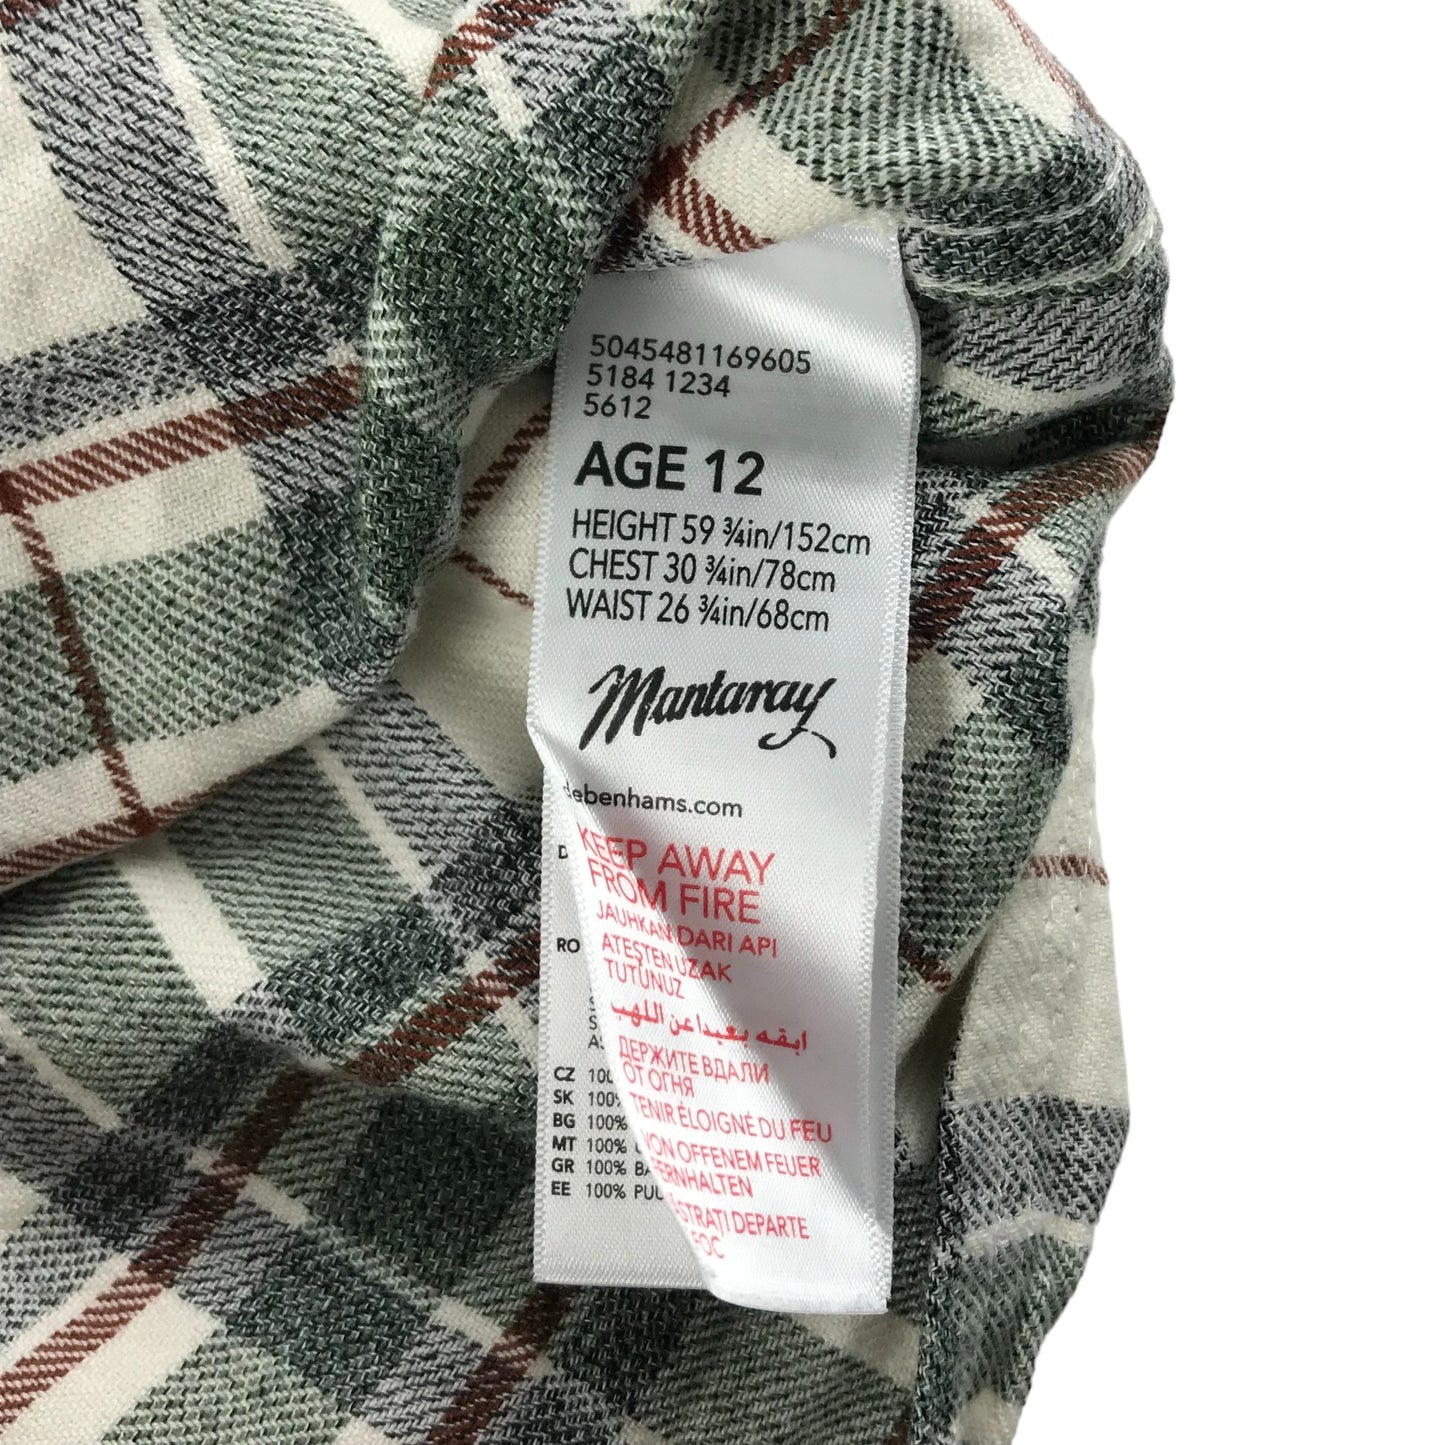 Mantaray Shirt Age 12 Grey White Red Checked Long Sleeve Button Up Cotton